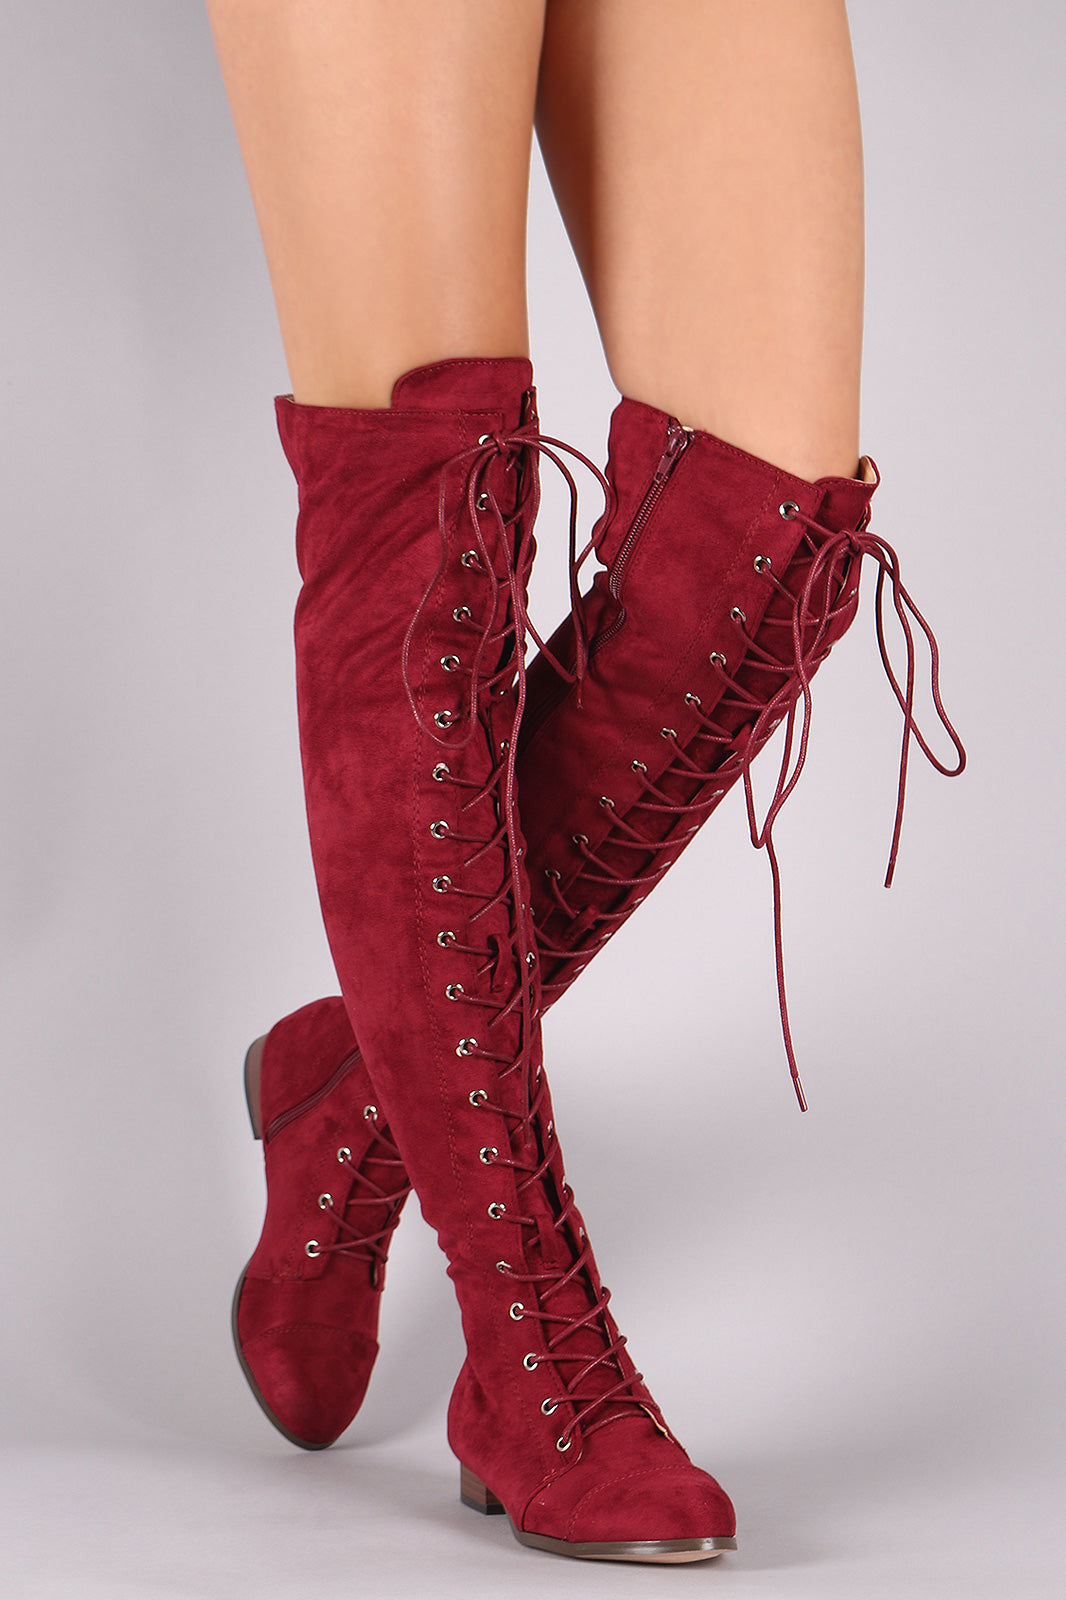 combat boots red laces